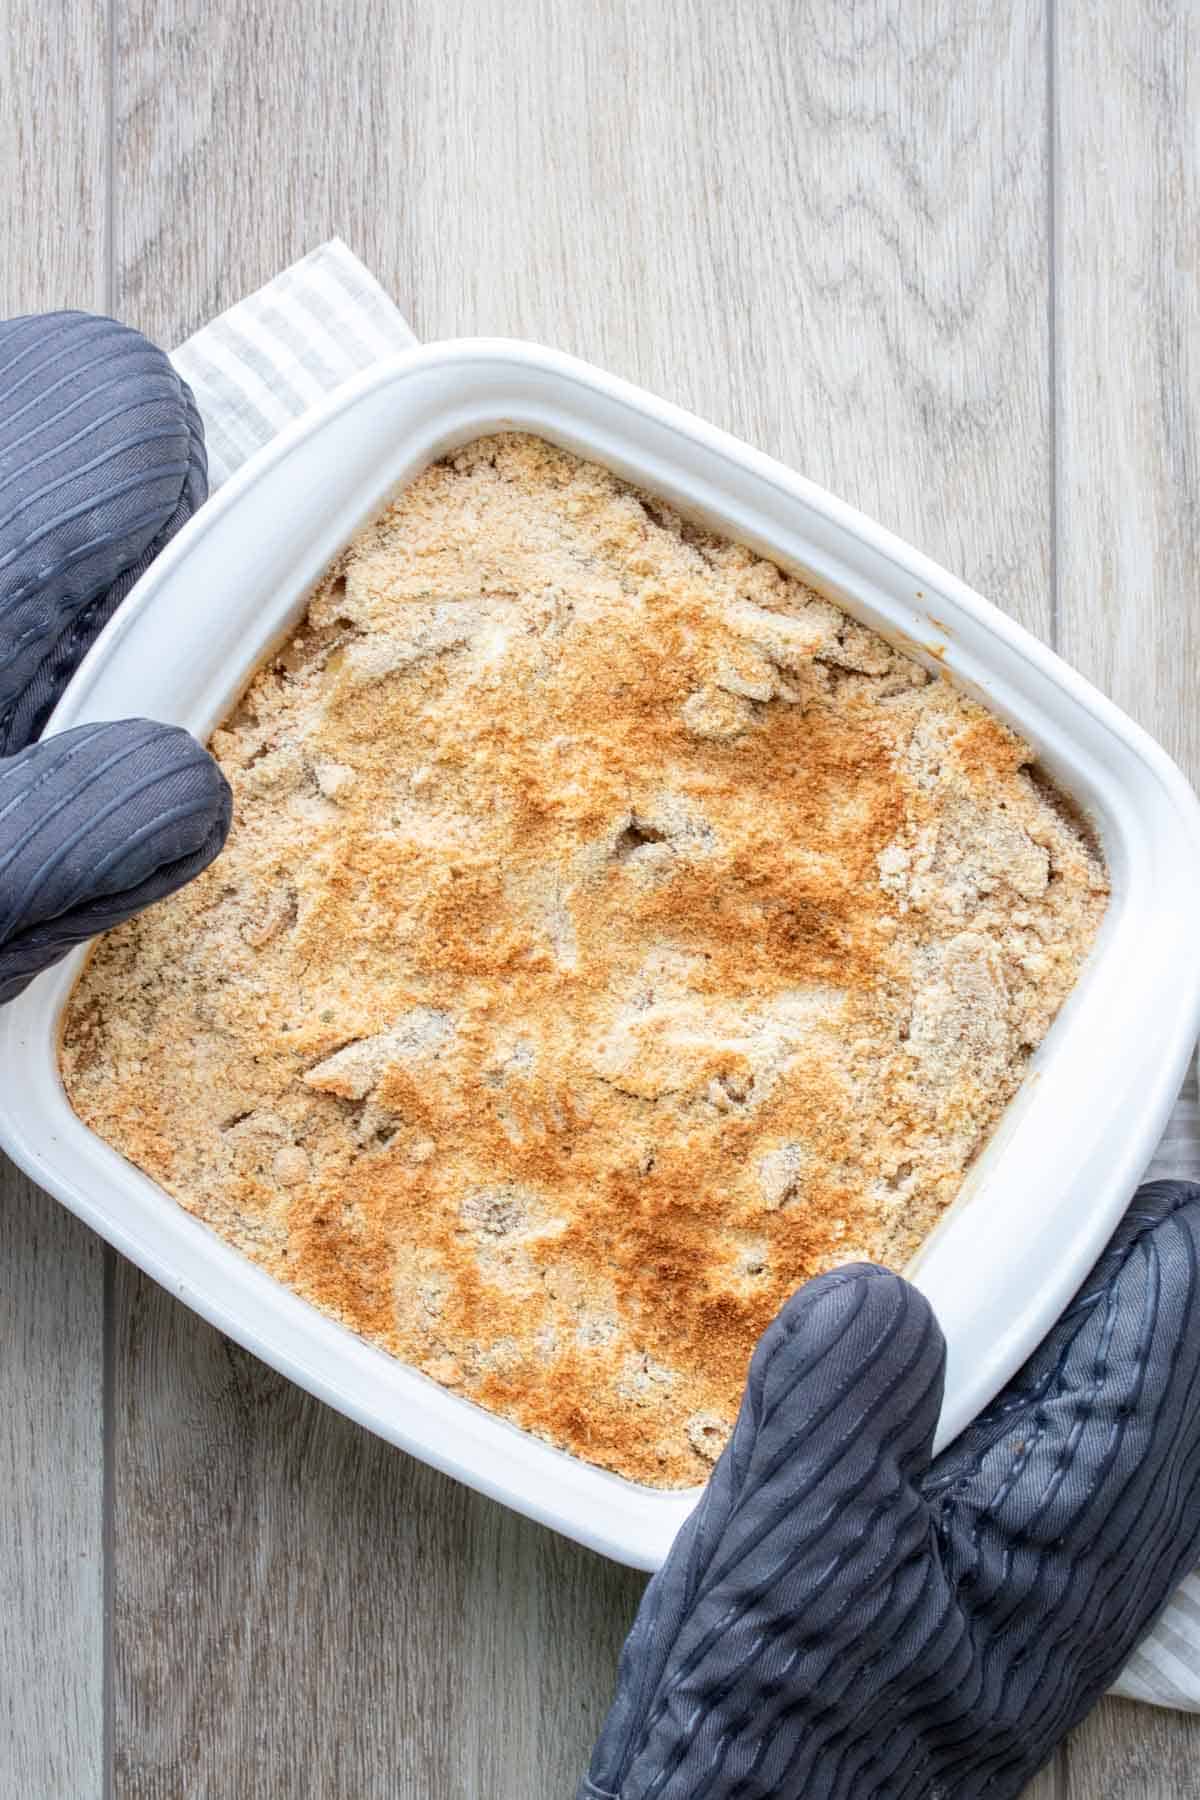 Potholders holding a white baking dish with a baked pasta and crispy topping in it